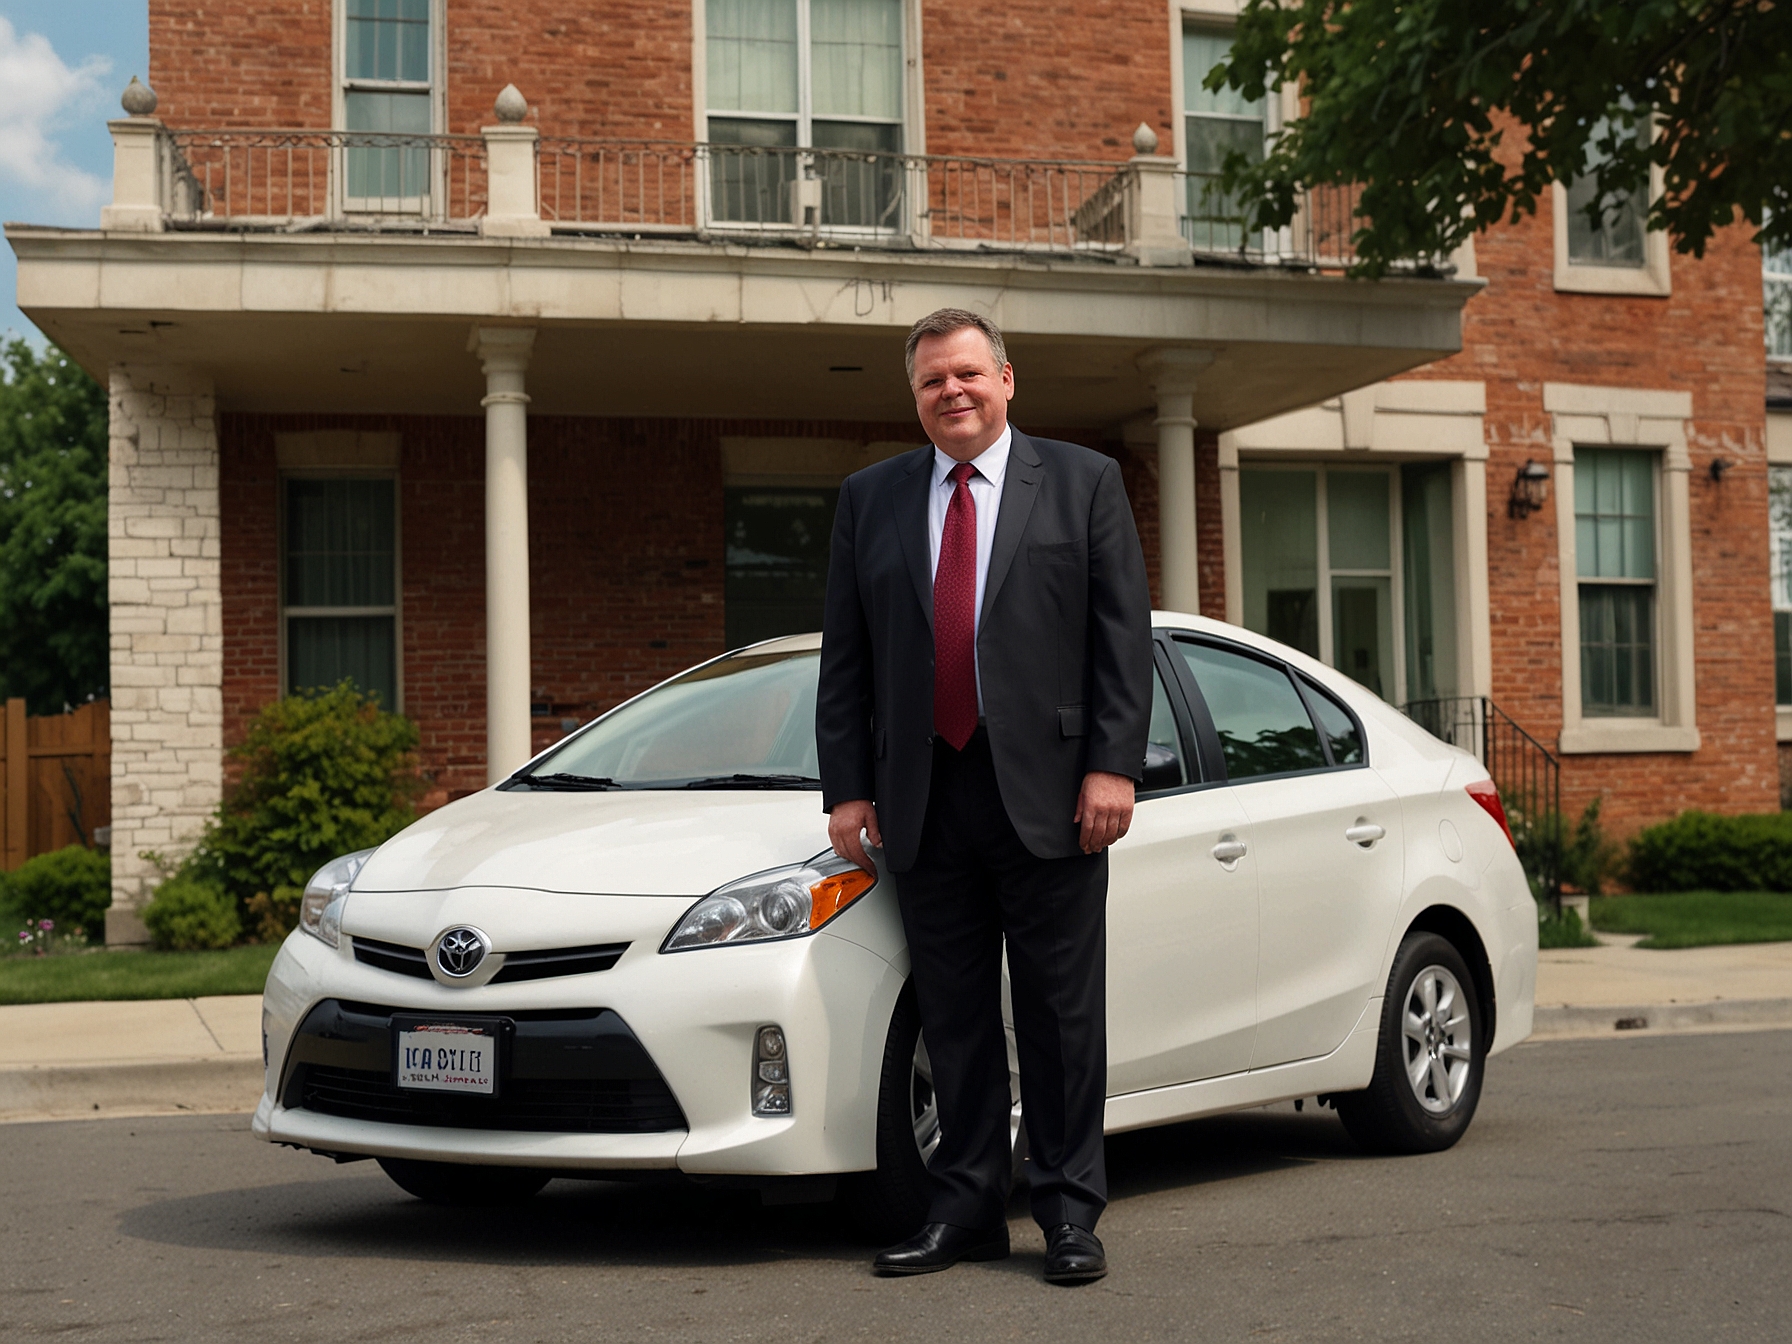 Senator Jon Tester stands beside his Toyota Prius in Washington, D.C., illustrating his choice of a fuel-efficient, environmentally friendly vehicle amidst political criticism.